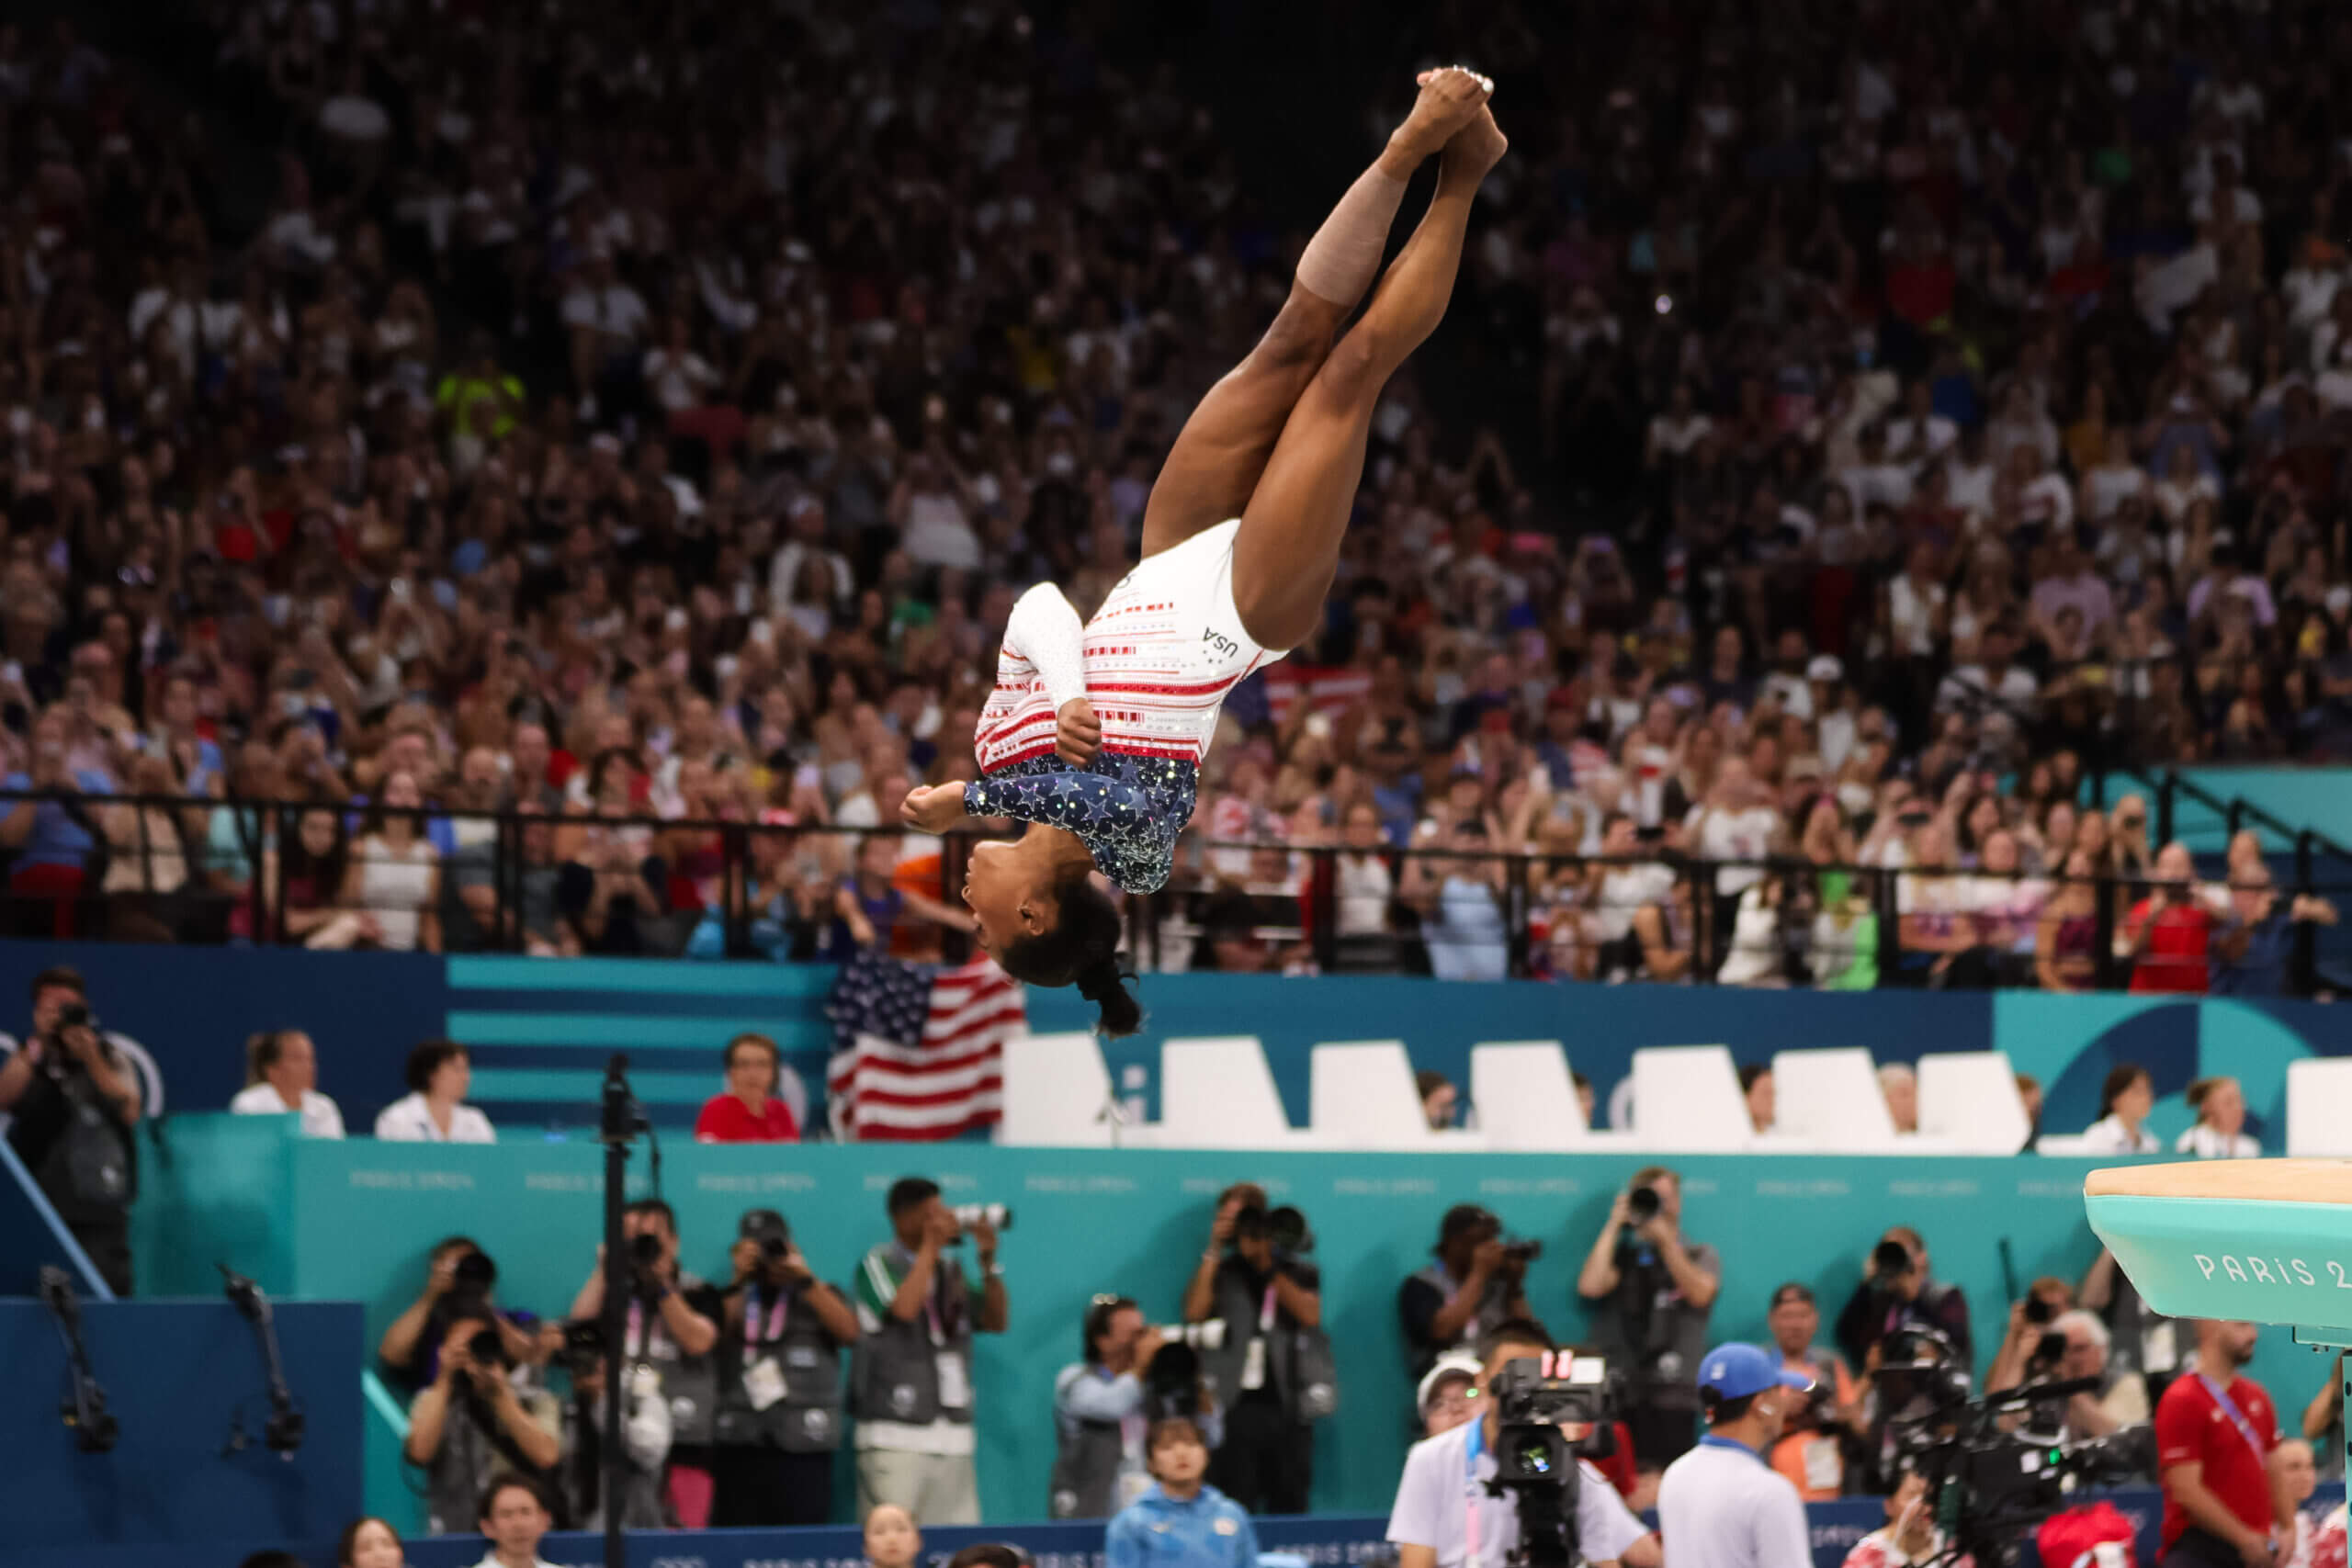 The night Simone Biles was the center of gravity at the Olympics once again